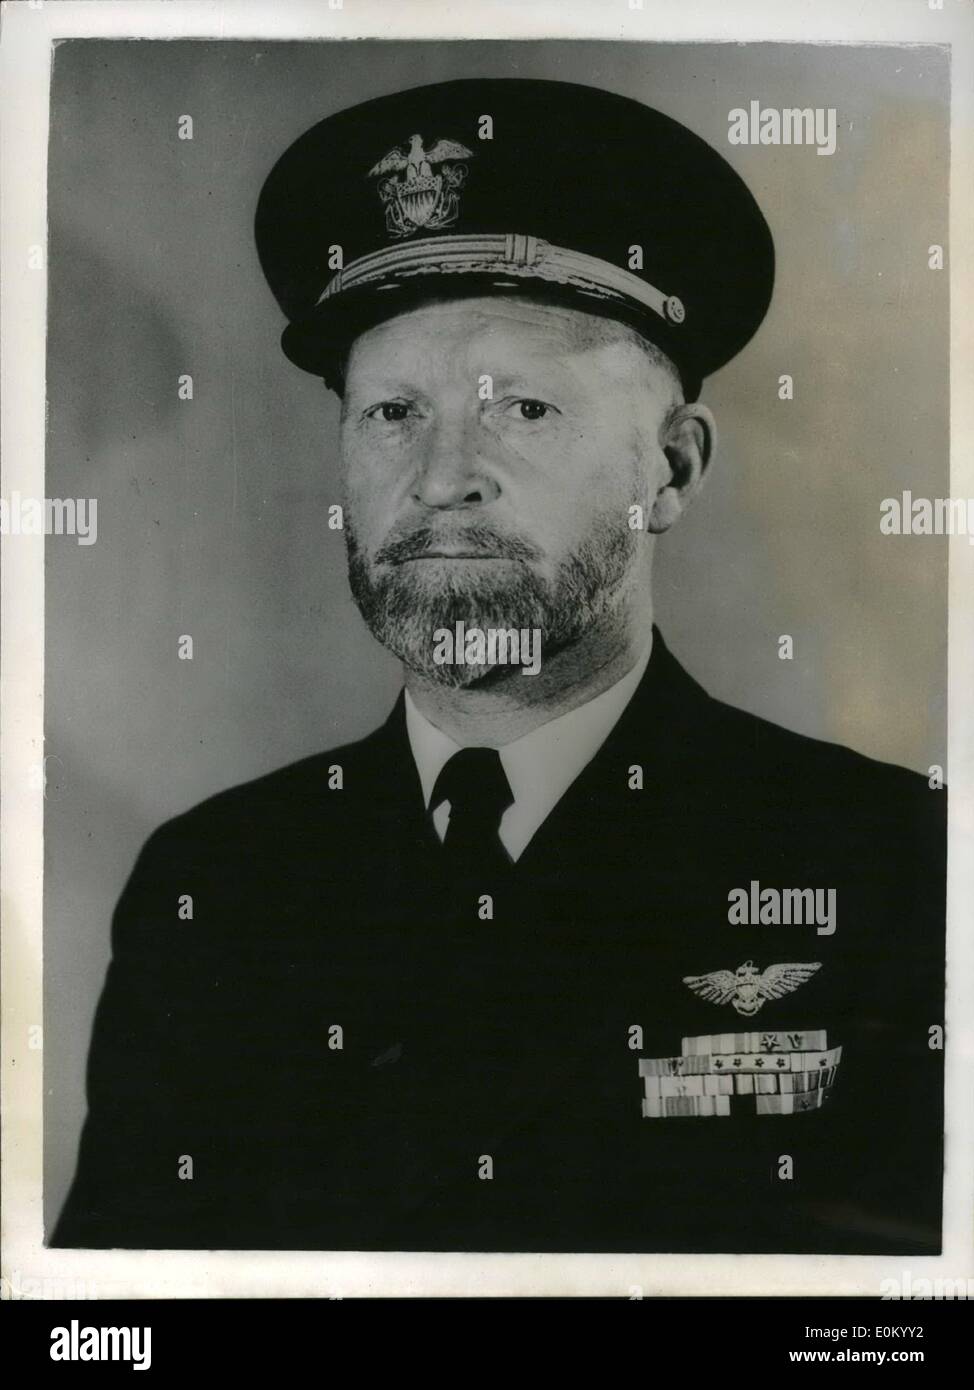 Dec. 12, 1952 - Rear Admiral Robert B. Pirie Of the U.S. Forces Chief of Staff to admiral Wright: Picture Shows: New portrait Rear Admiral Robert B. Pirie the new chief of staff to Vice Admiral Jerauld Wright, Commander - in- Chief U.S. Naval Forces in the Eastern Atlantic and Mediterranean. Stock Photo